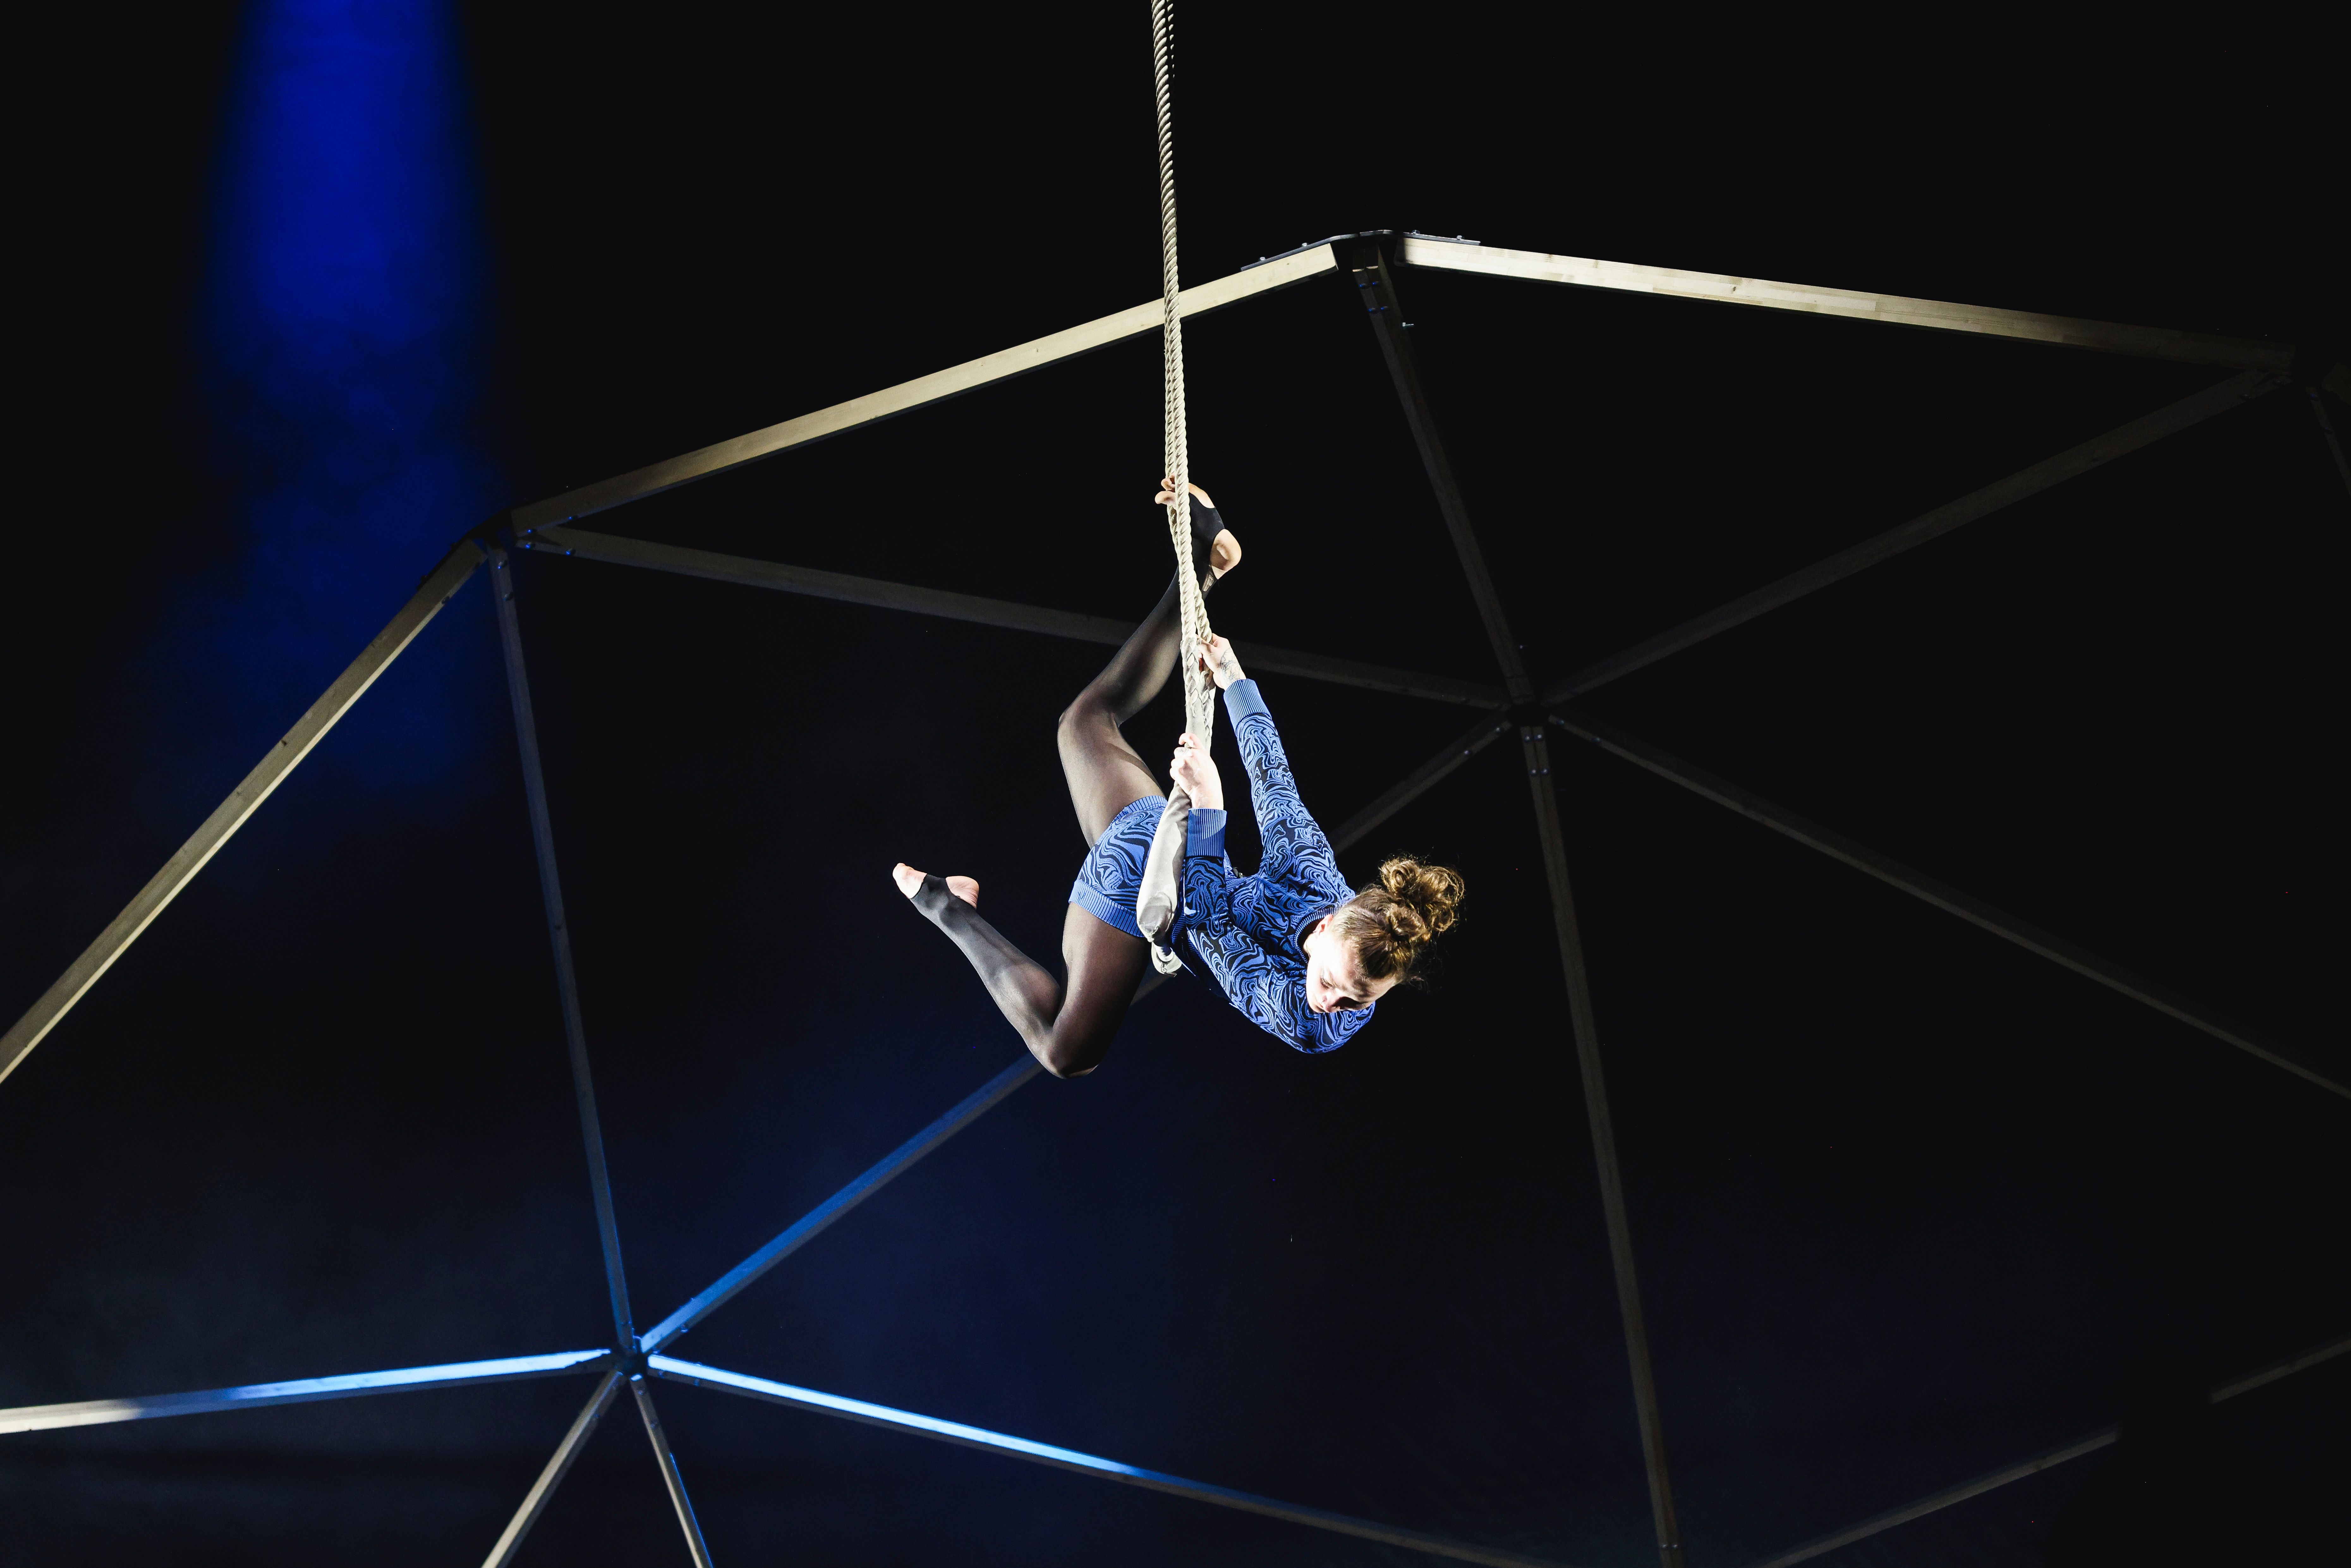 An acrobat hangs on a rope during a performance.